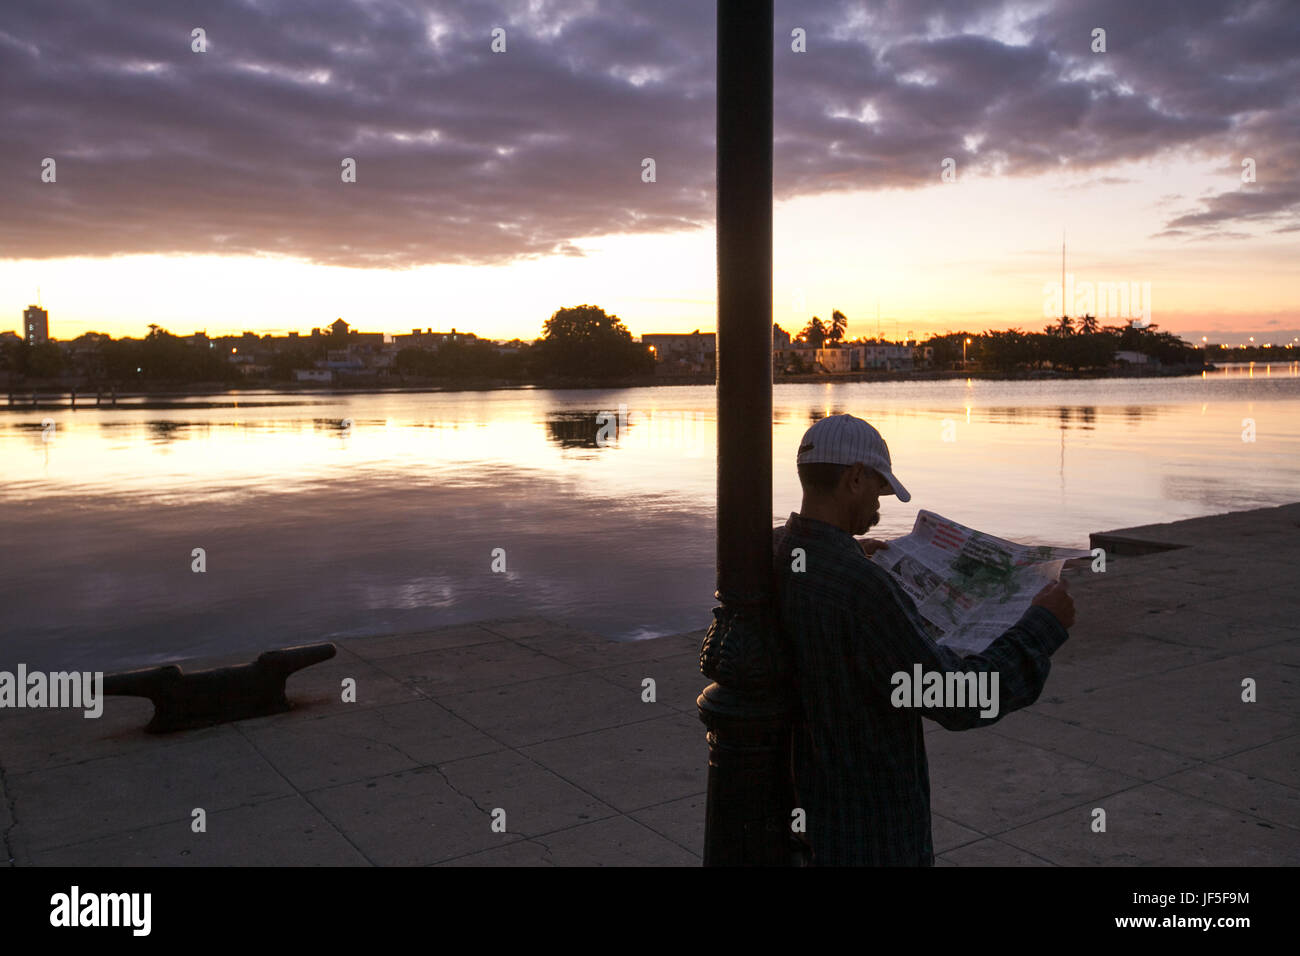 Along the waterfront of Cienfuegos, a man leans again a lamp post and reads a newspaper at dusk. Stock Photo